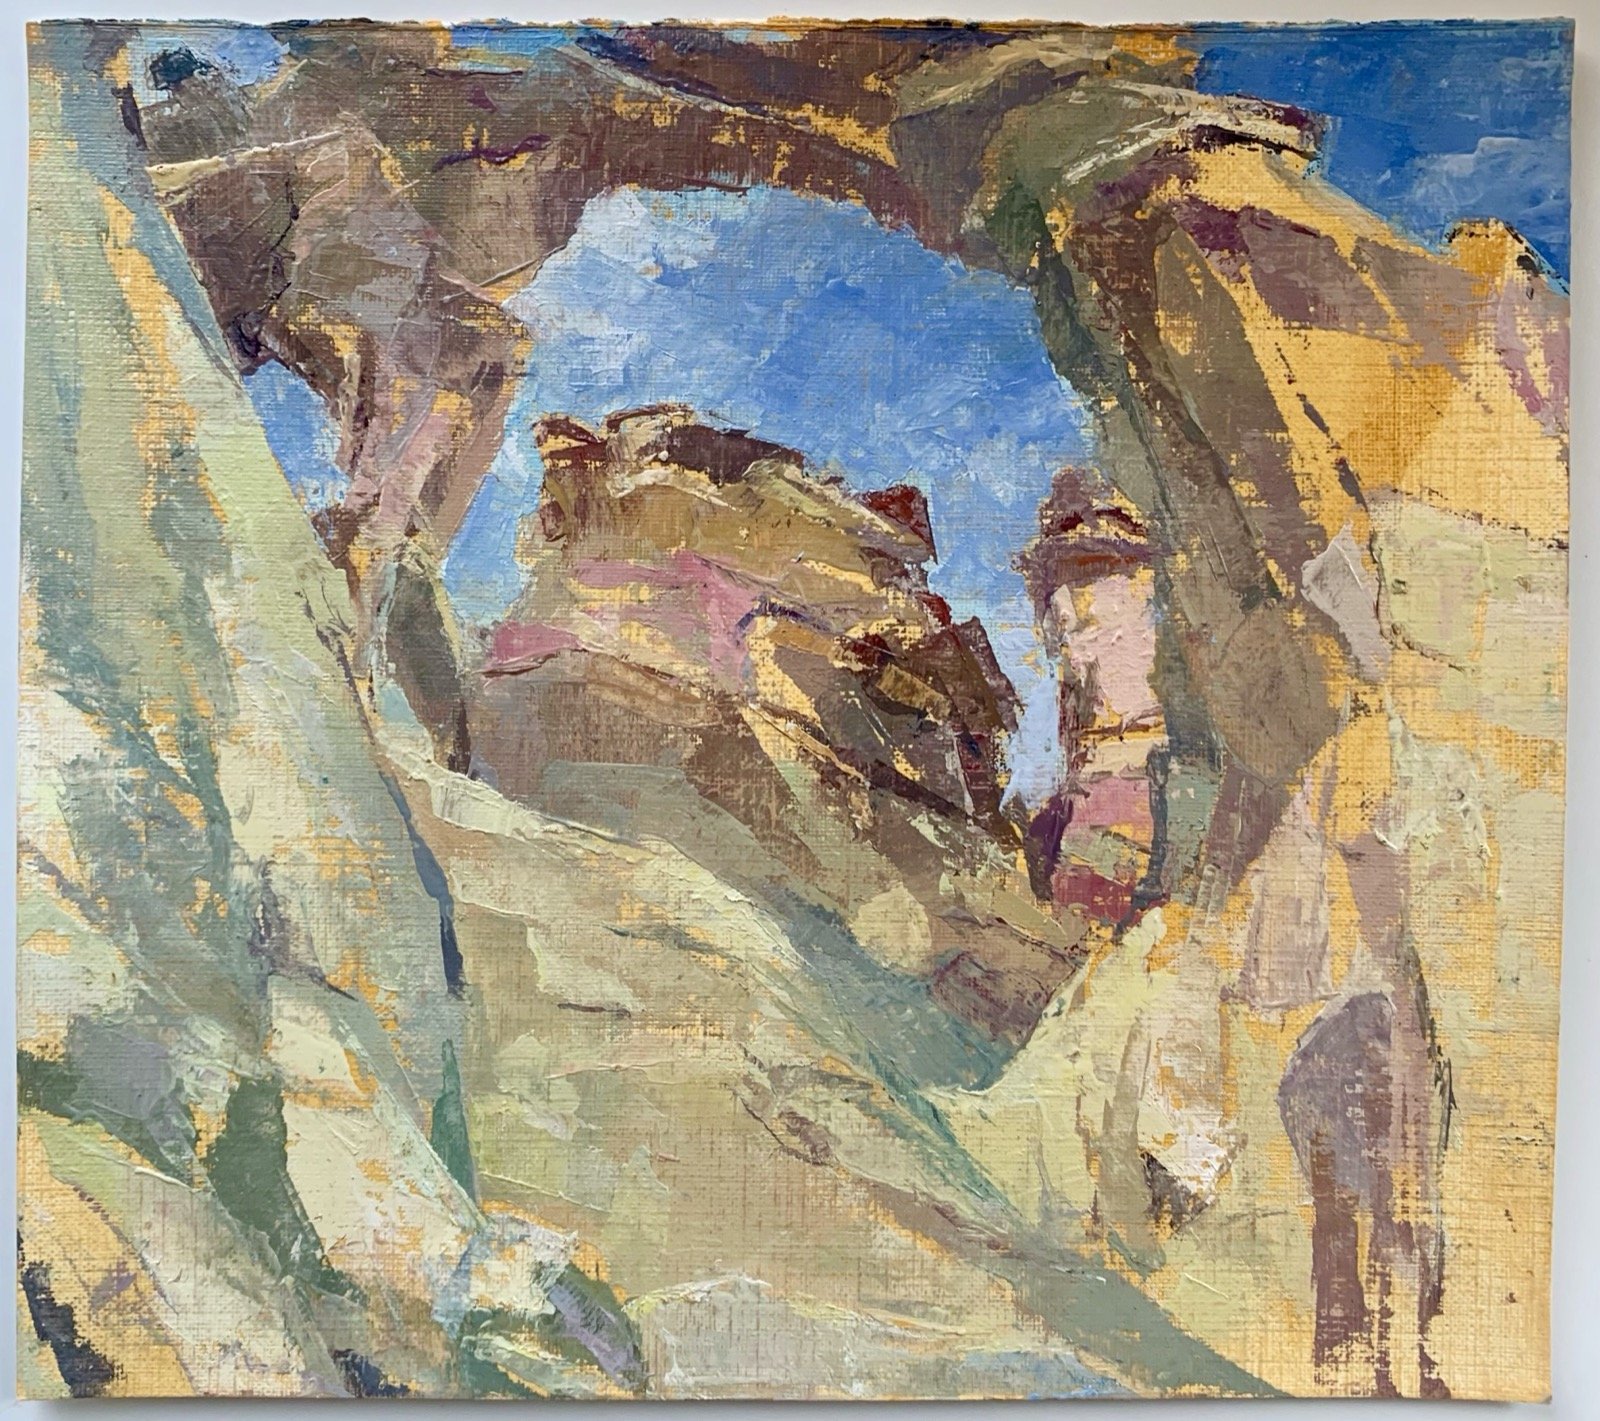   Grosvenor Double Arch , 2021 oil on paper, 6 x 7 in 